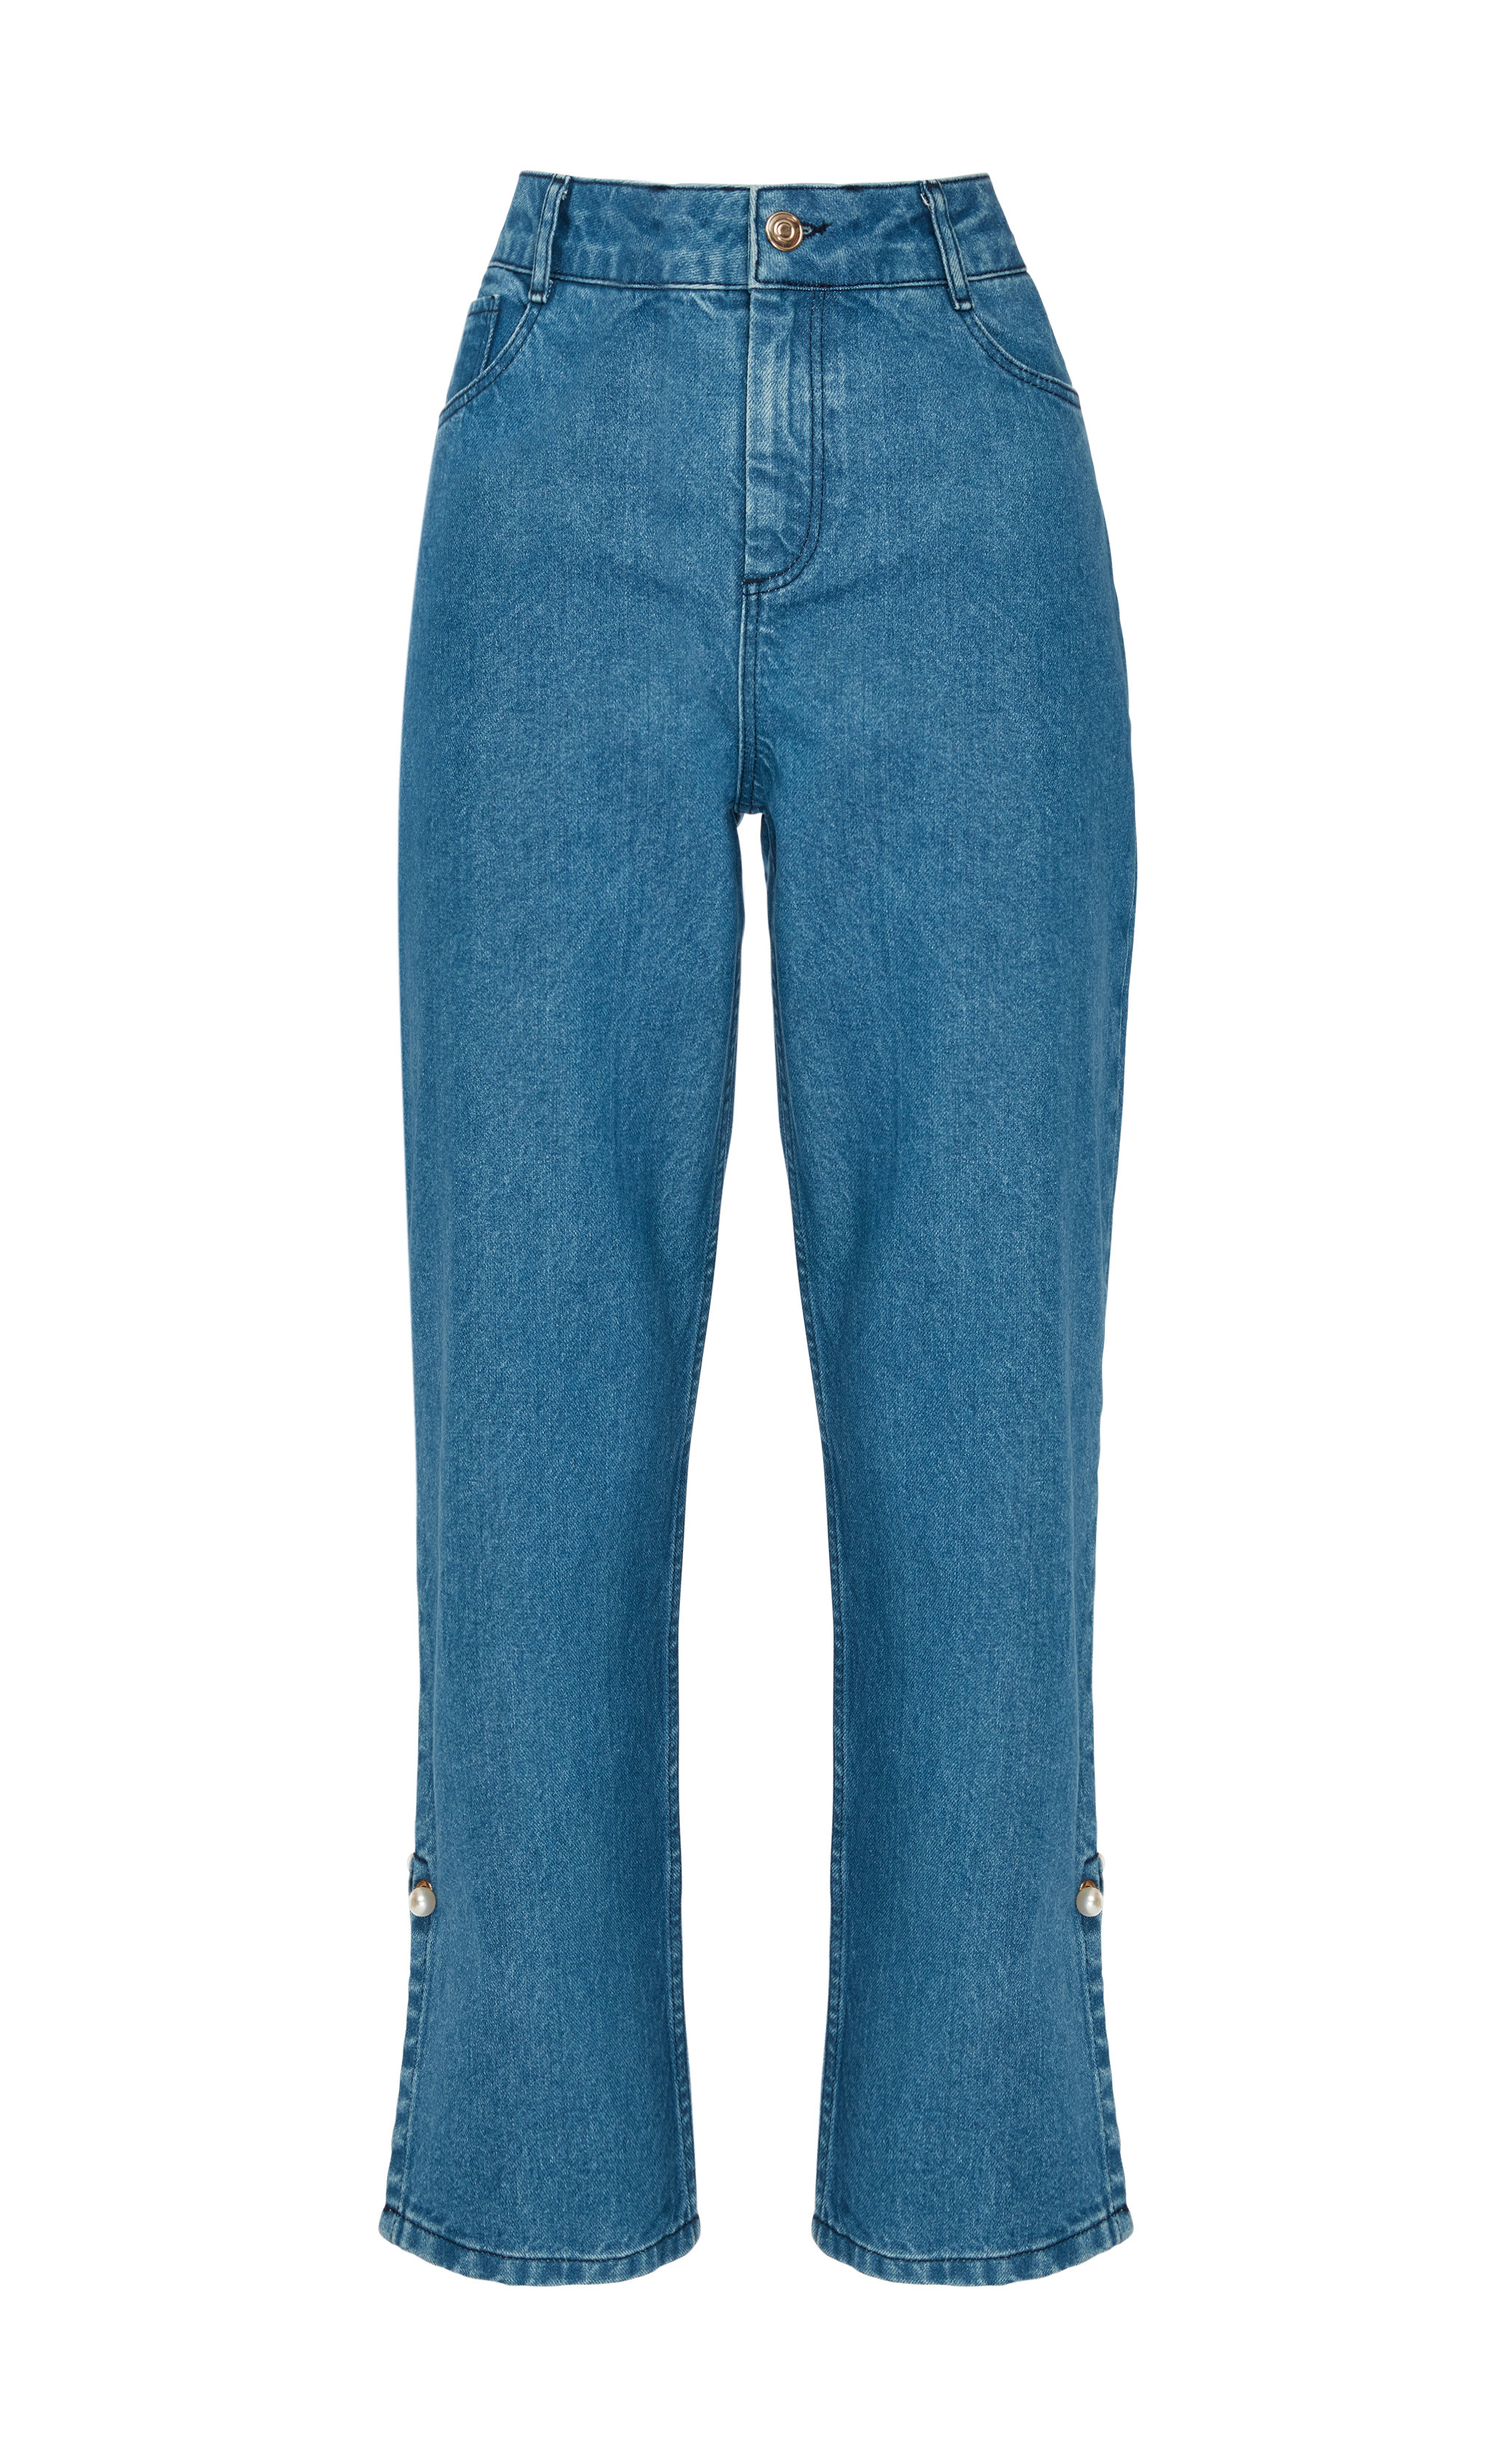 RITA RECYCLED MIDWASH JEANS